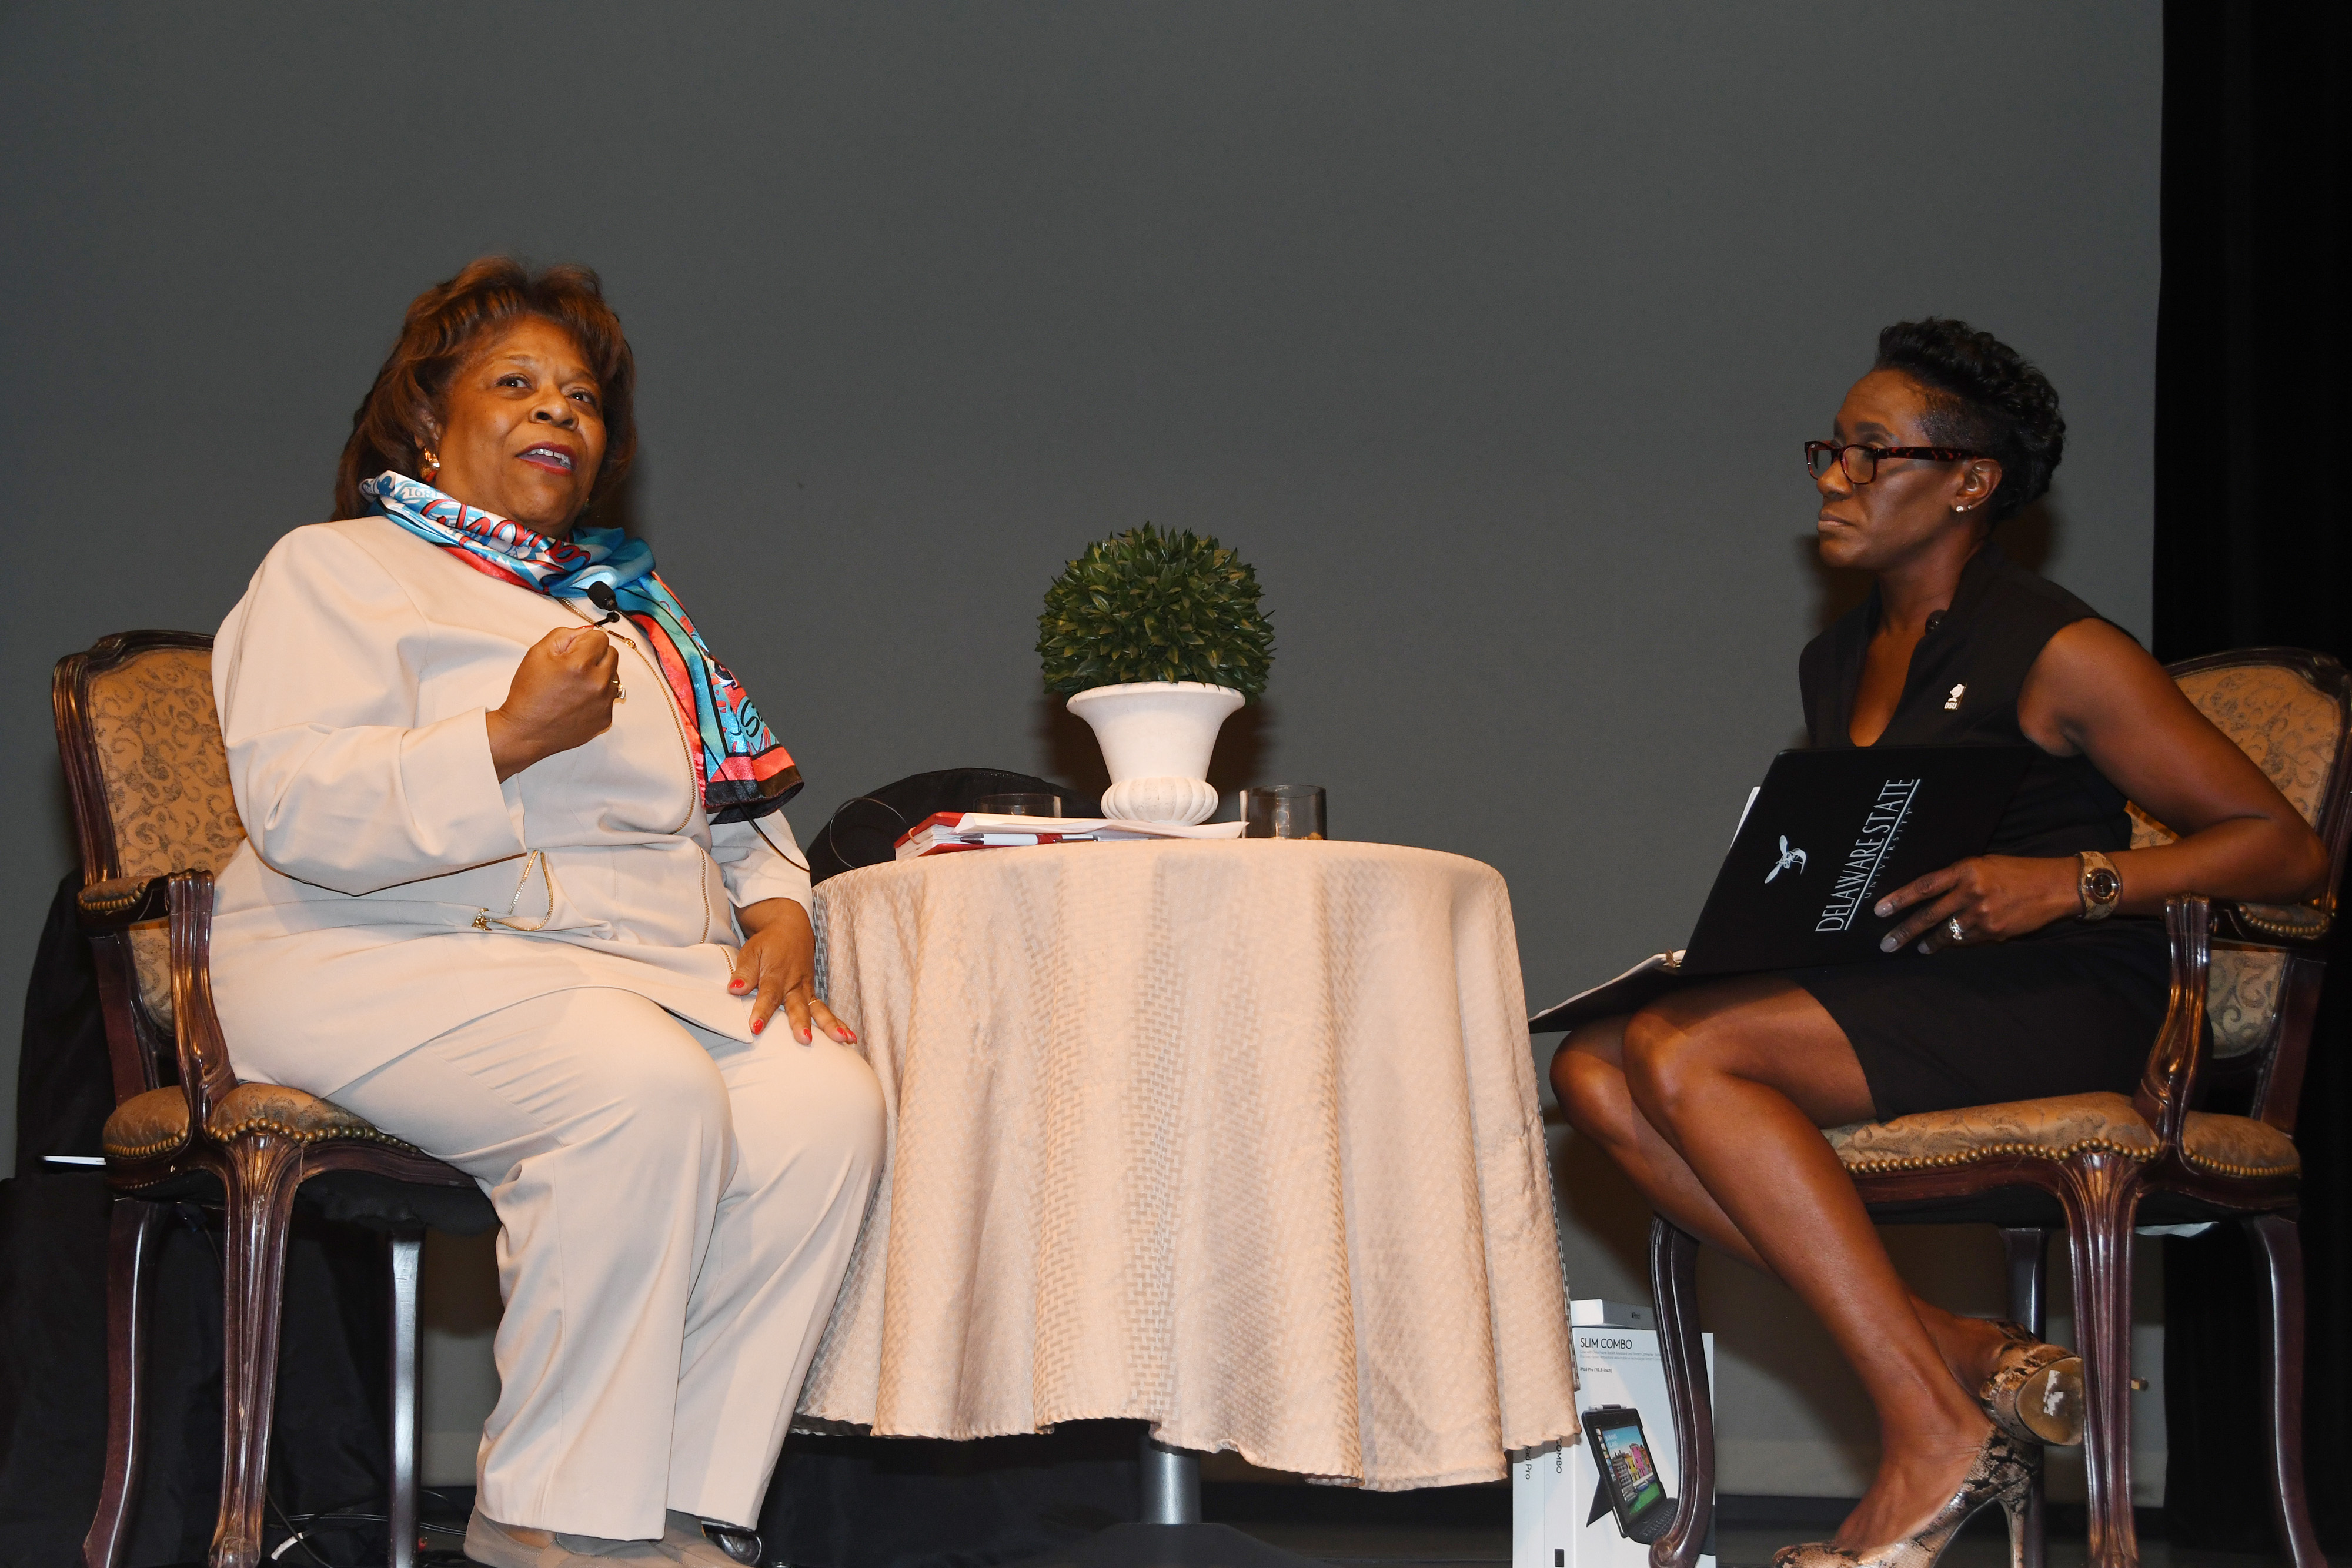 DSU President Wilma Mishoe (L) shares her vision and priorities for the University during the Q&A portion the Faculty Opening Institute, facilitated by Dr. Francine Edwards, dean of the College of Humanities, Education and Social Sciences.